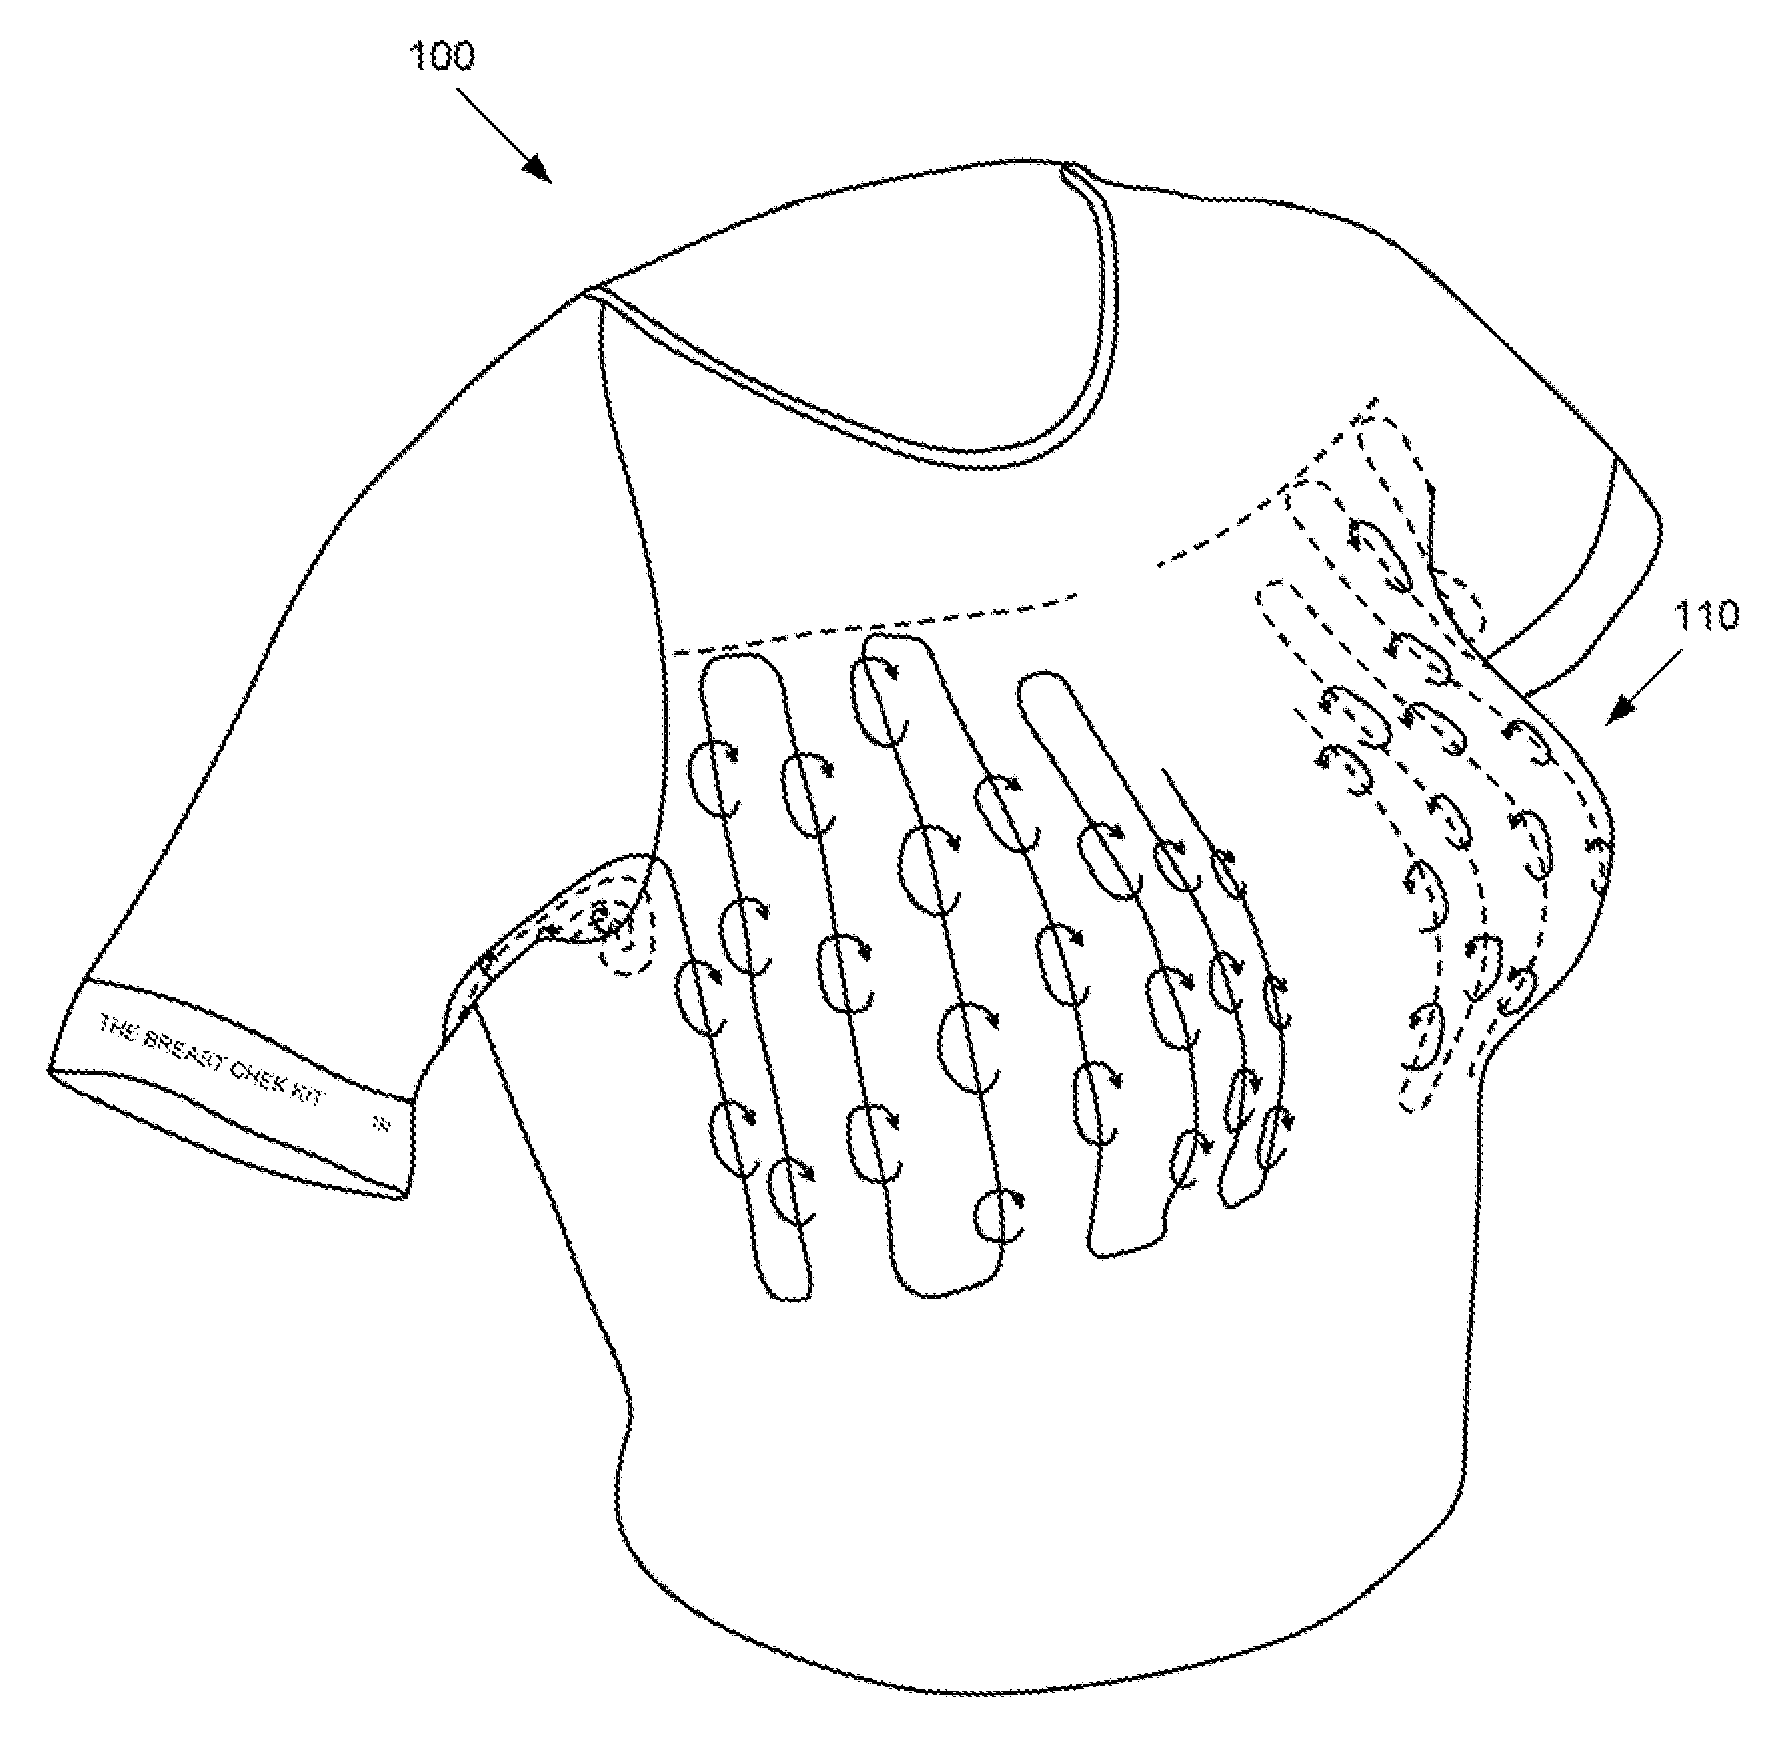 Garment for use in a breast self-examination